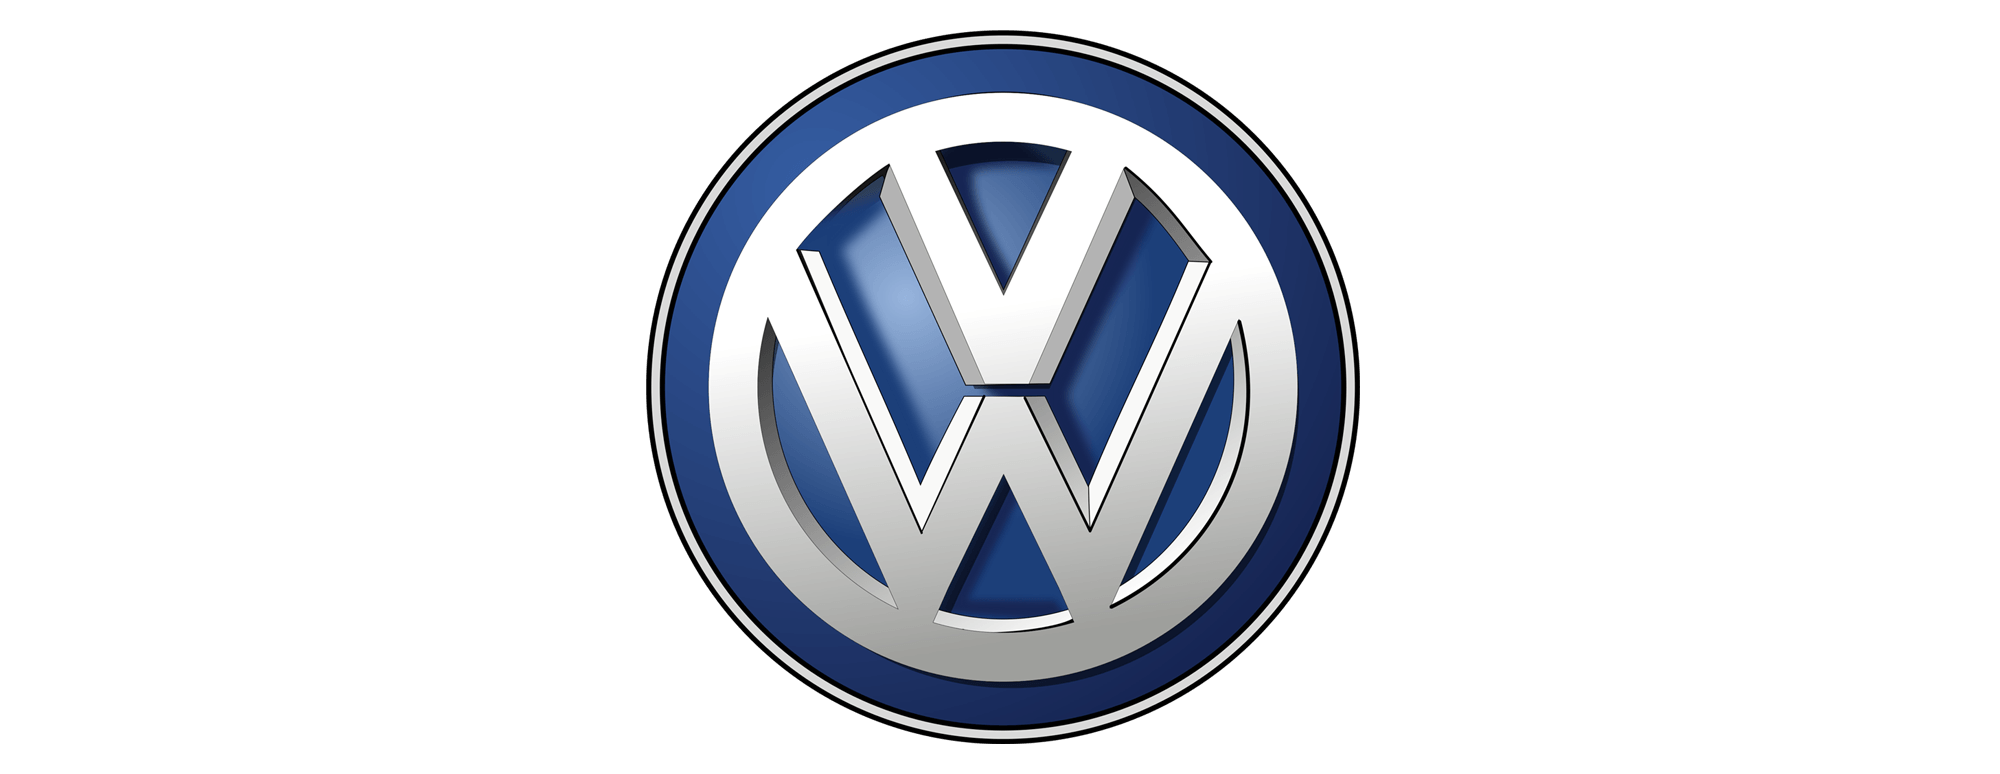 VW Nazi Logo - Volkswagen Logo Meaning and History, latest models | World Cars Brands